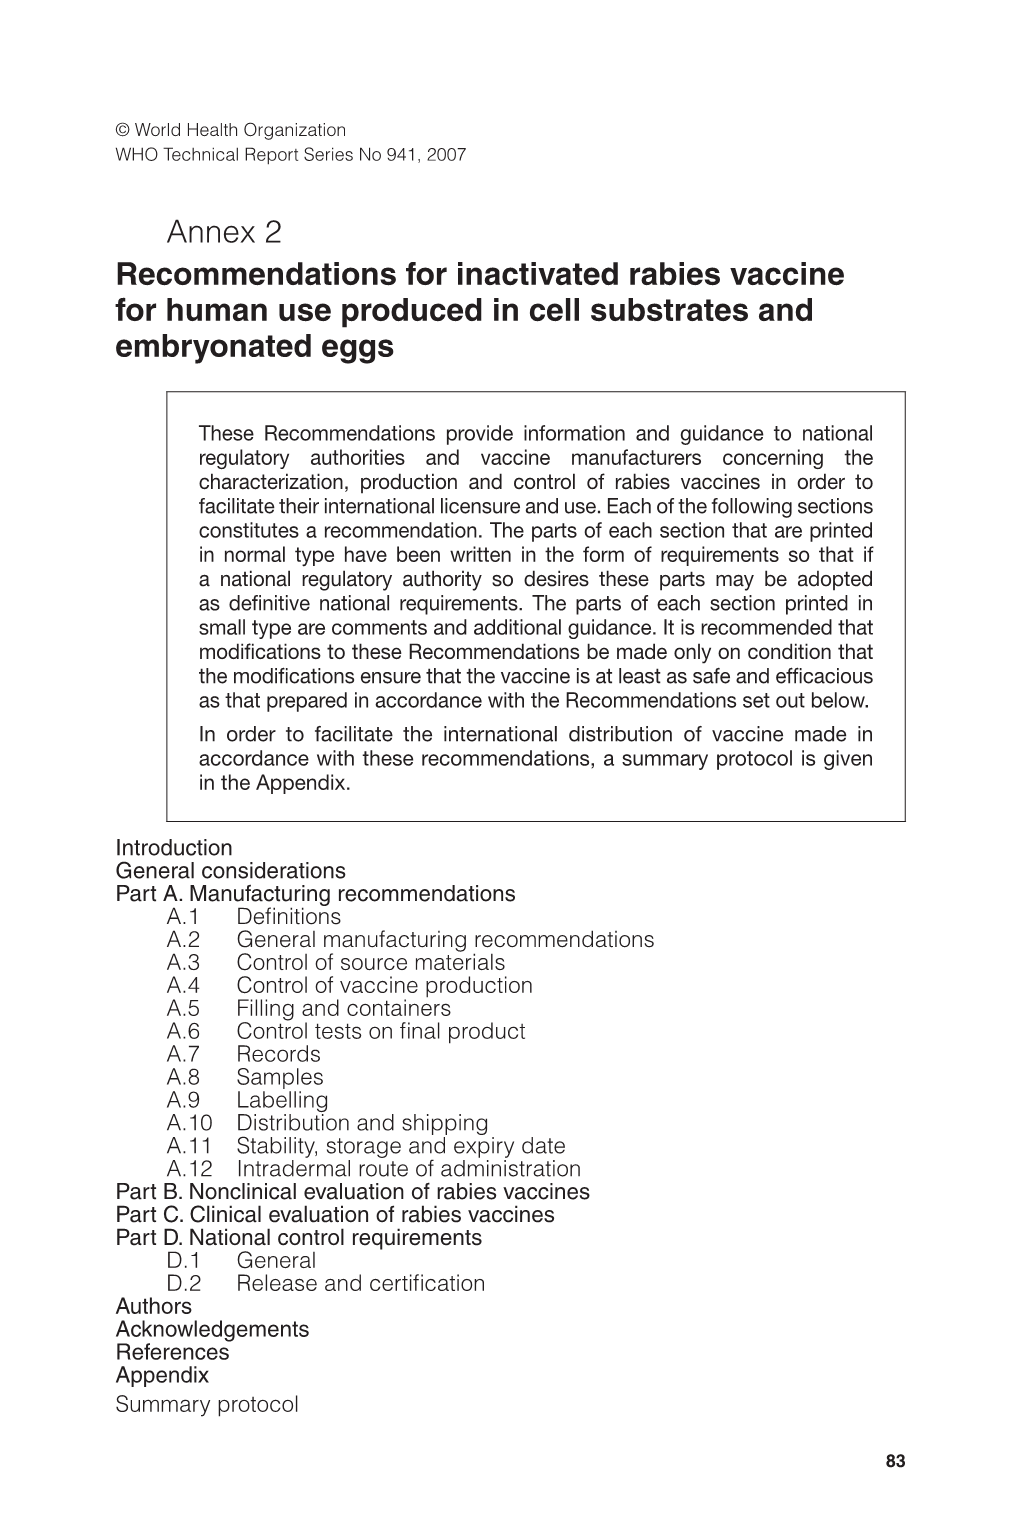 Recommendations for Inactivated Rabies Vaccine for Human Use Produced in Cell Substrates and Embryonated Eggs